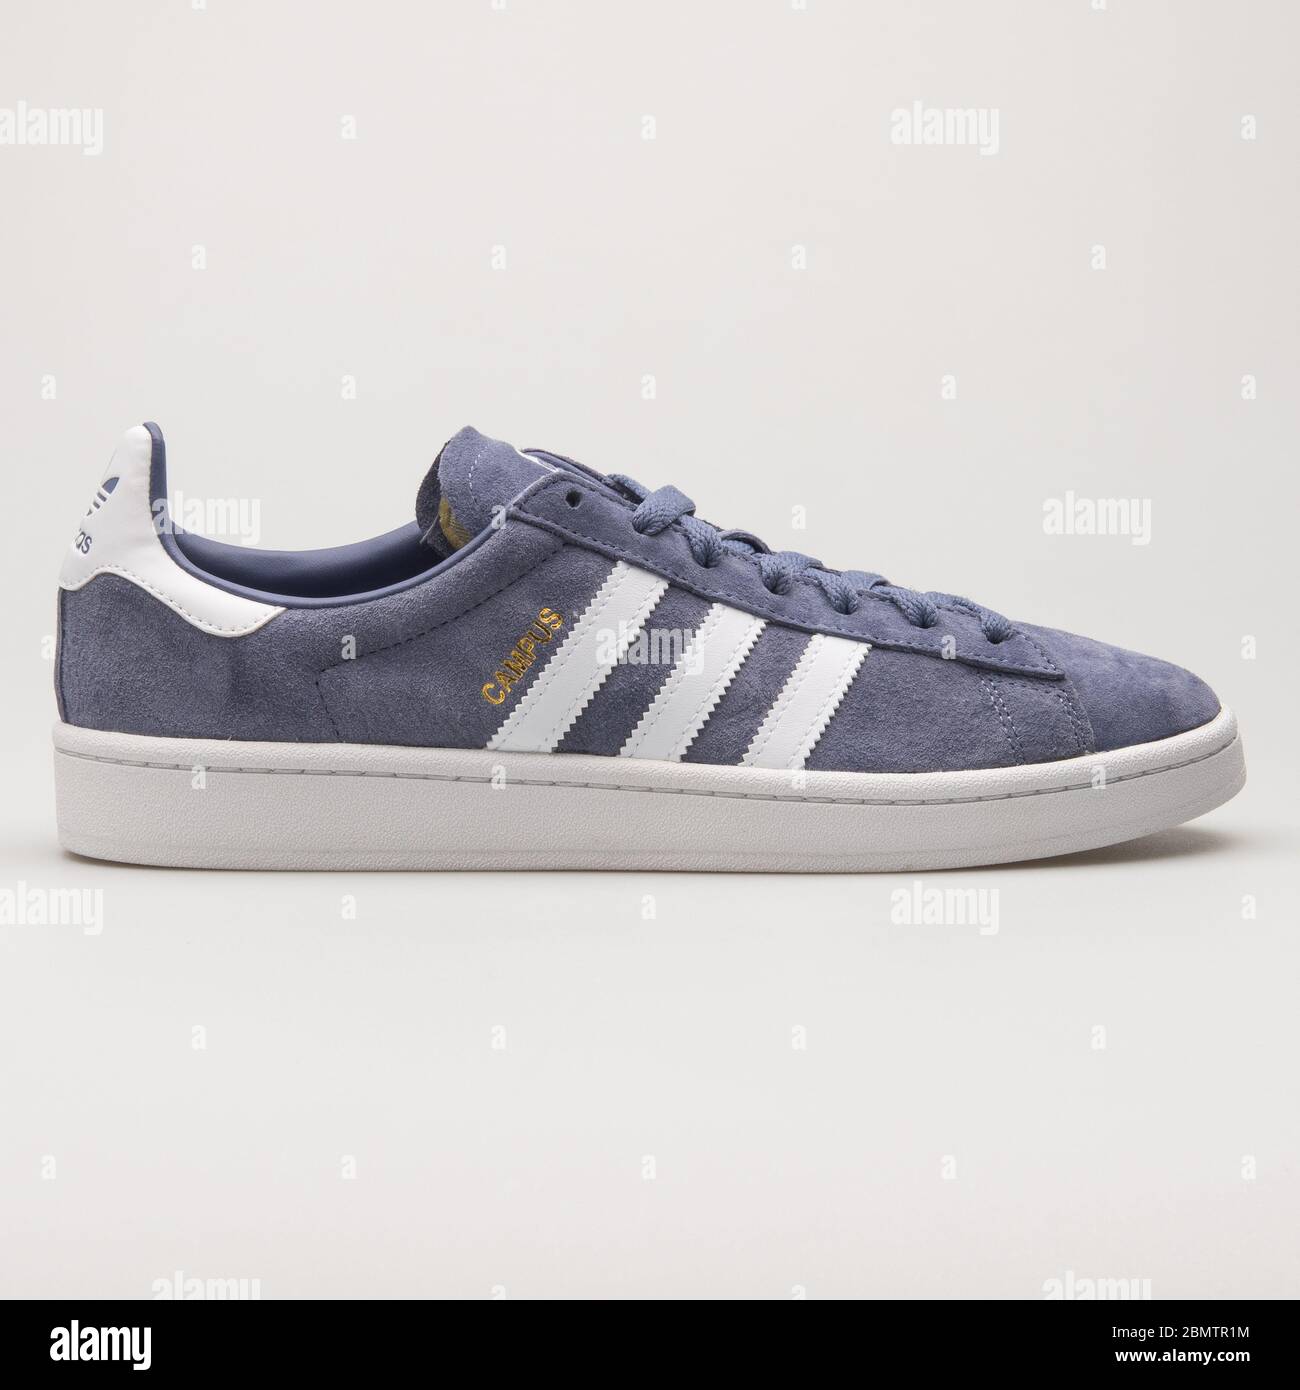 Adidas Campus purple and white sneaker 